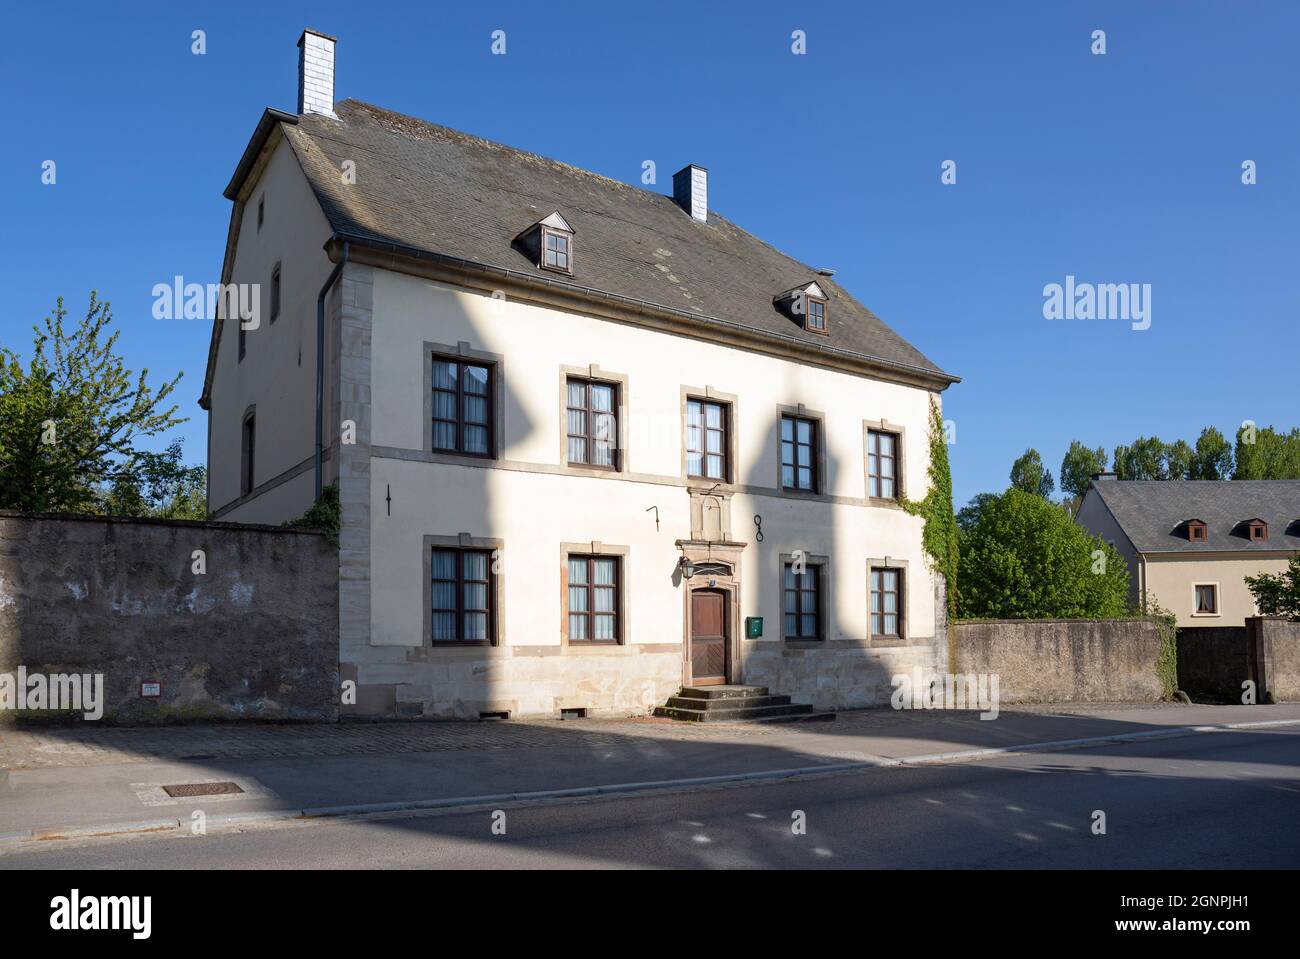 Europe, Luxembourg, Mersch, Historic House on Rue Nicolas Welter Stock  Photo - Alamy